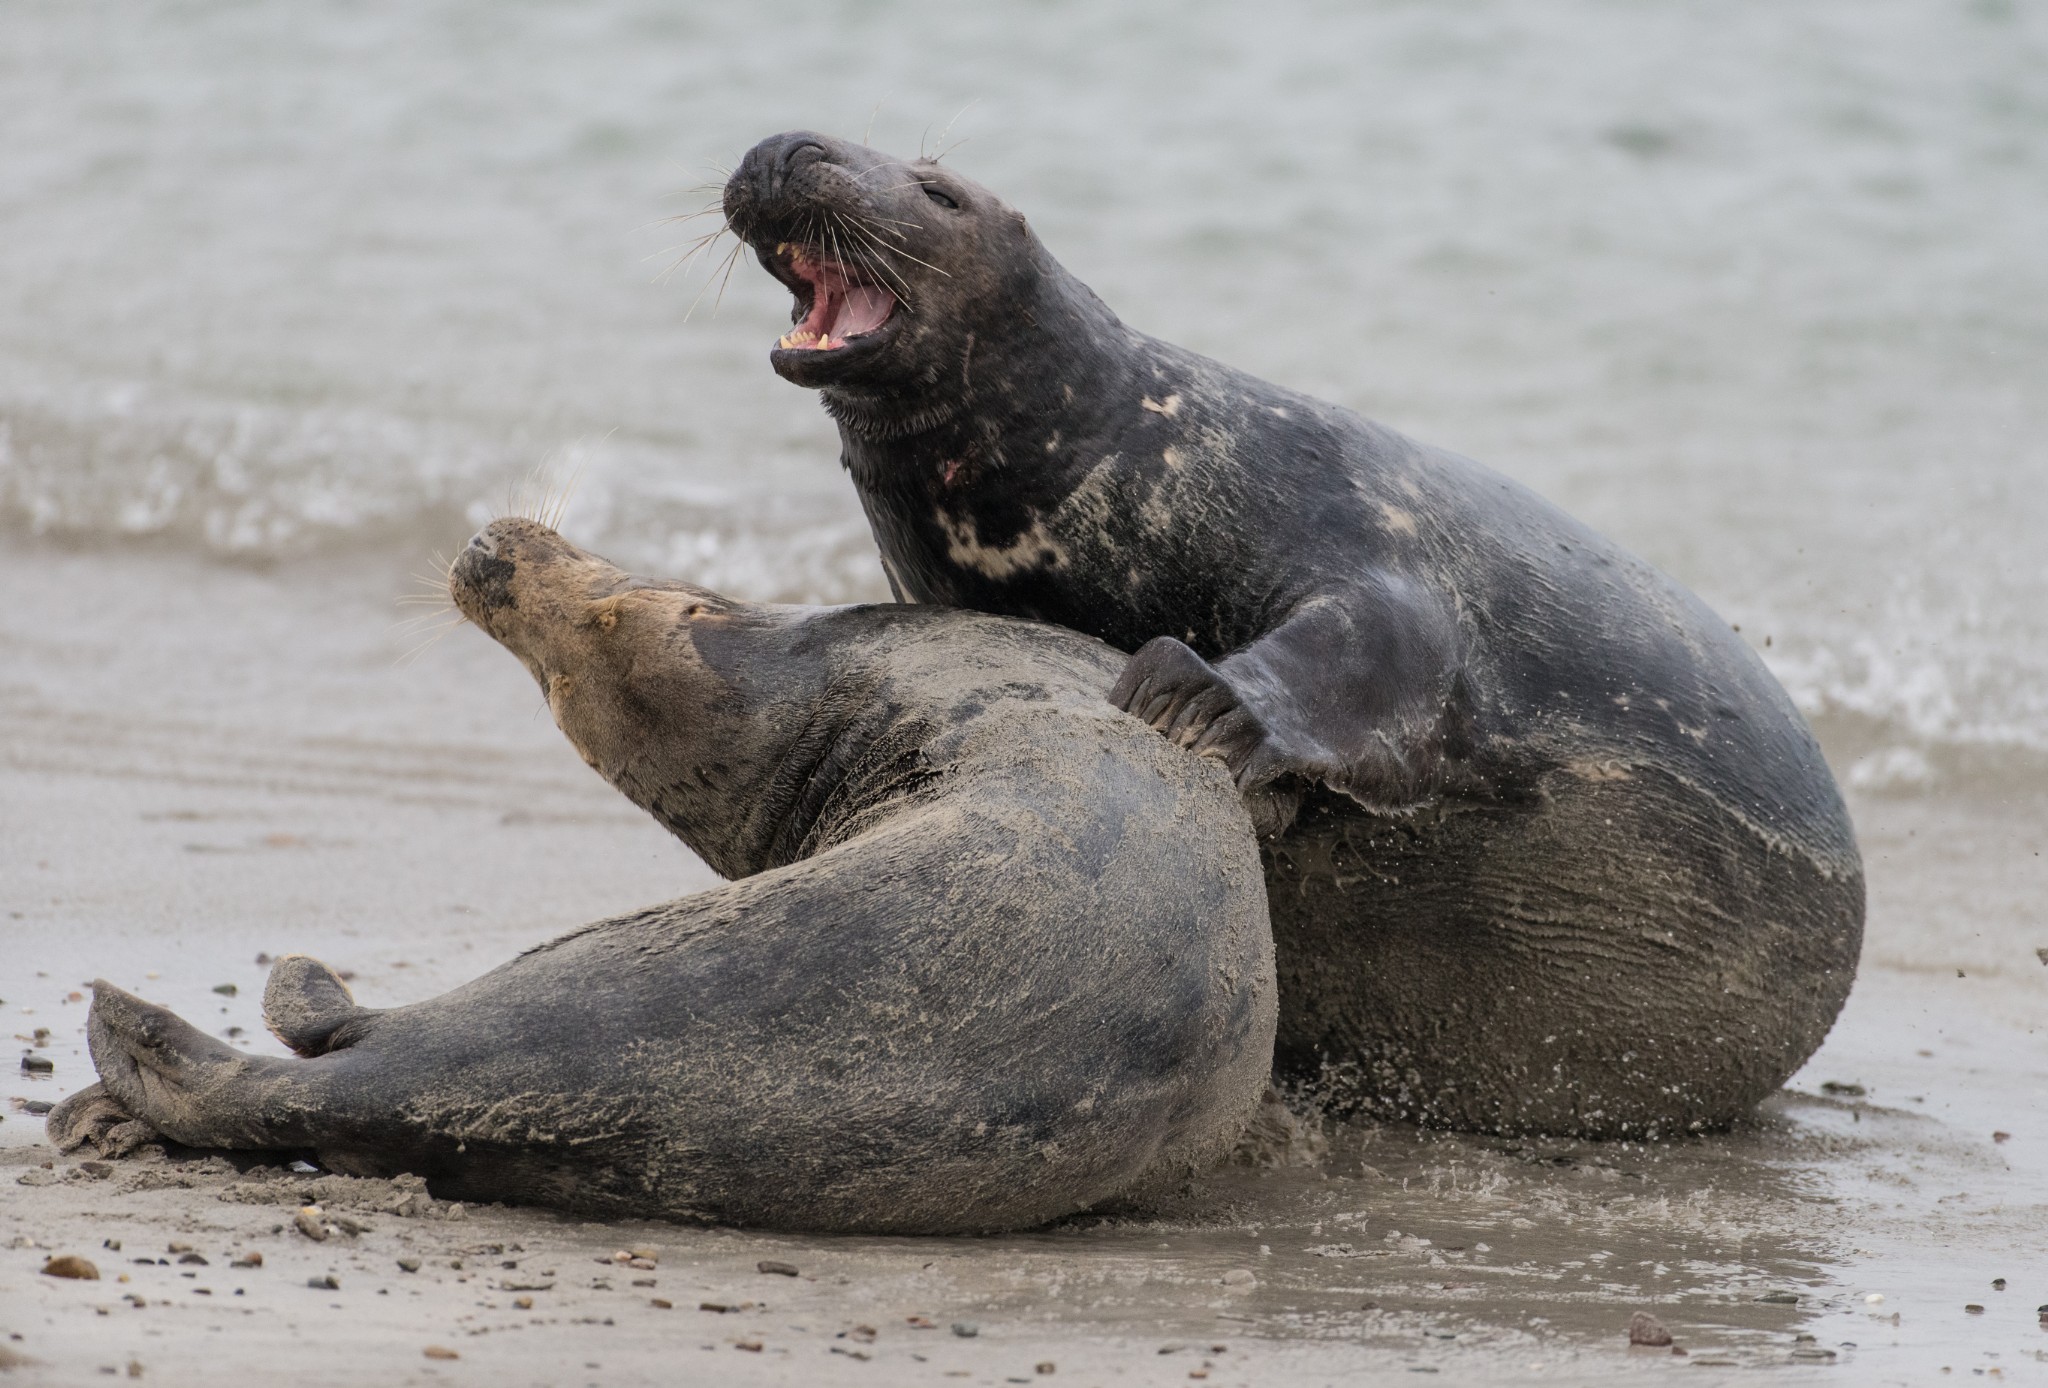 Grey seals in Orkney - image by Raymond Besant